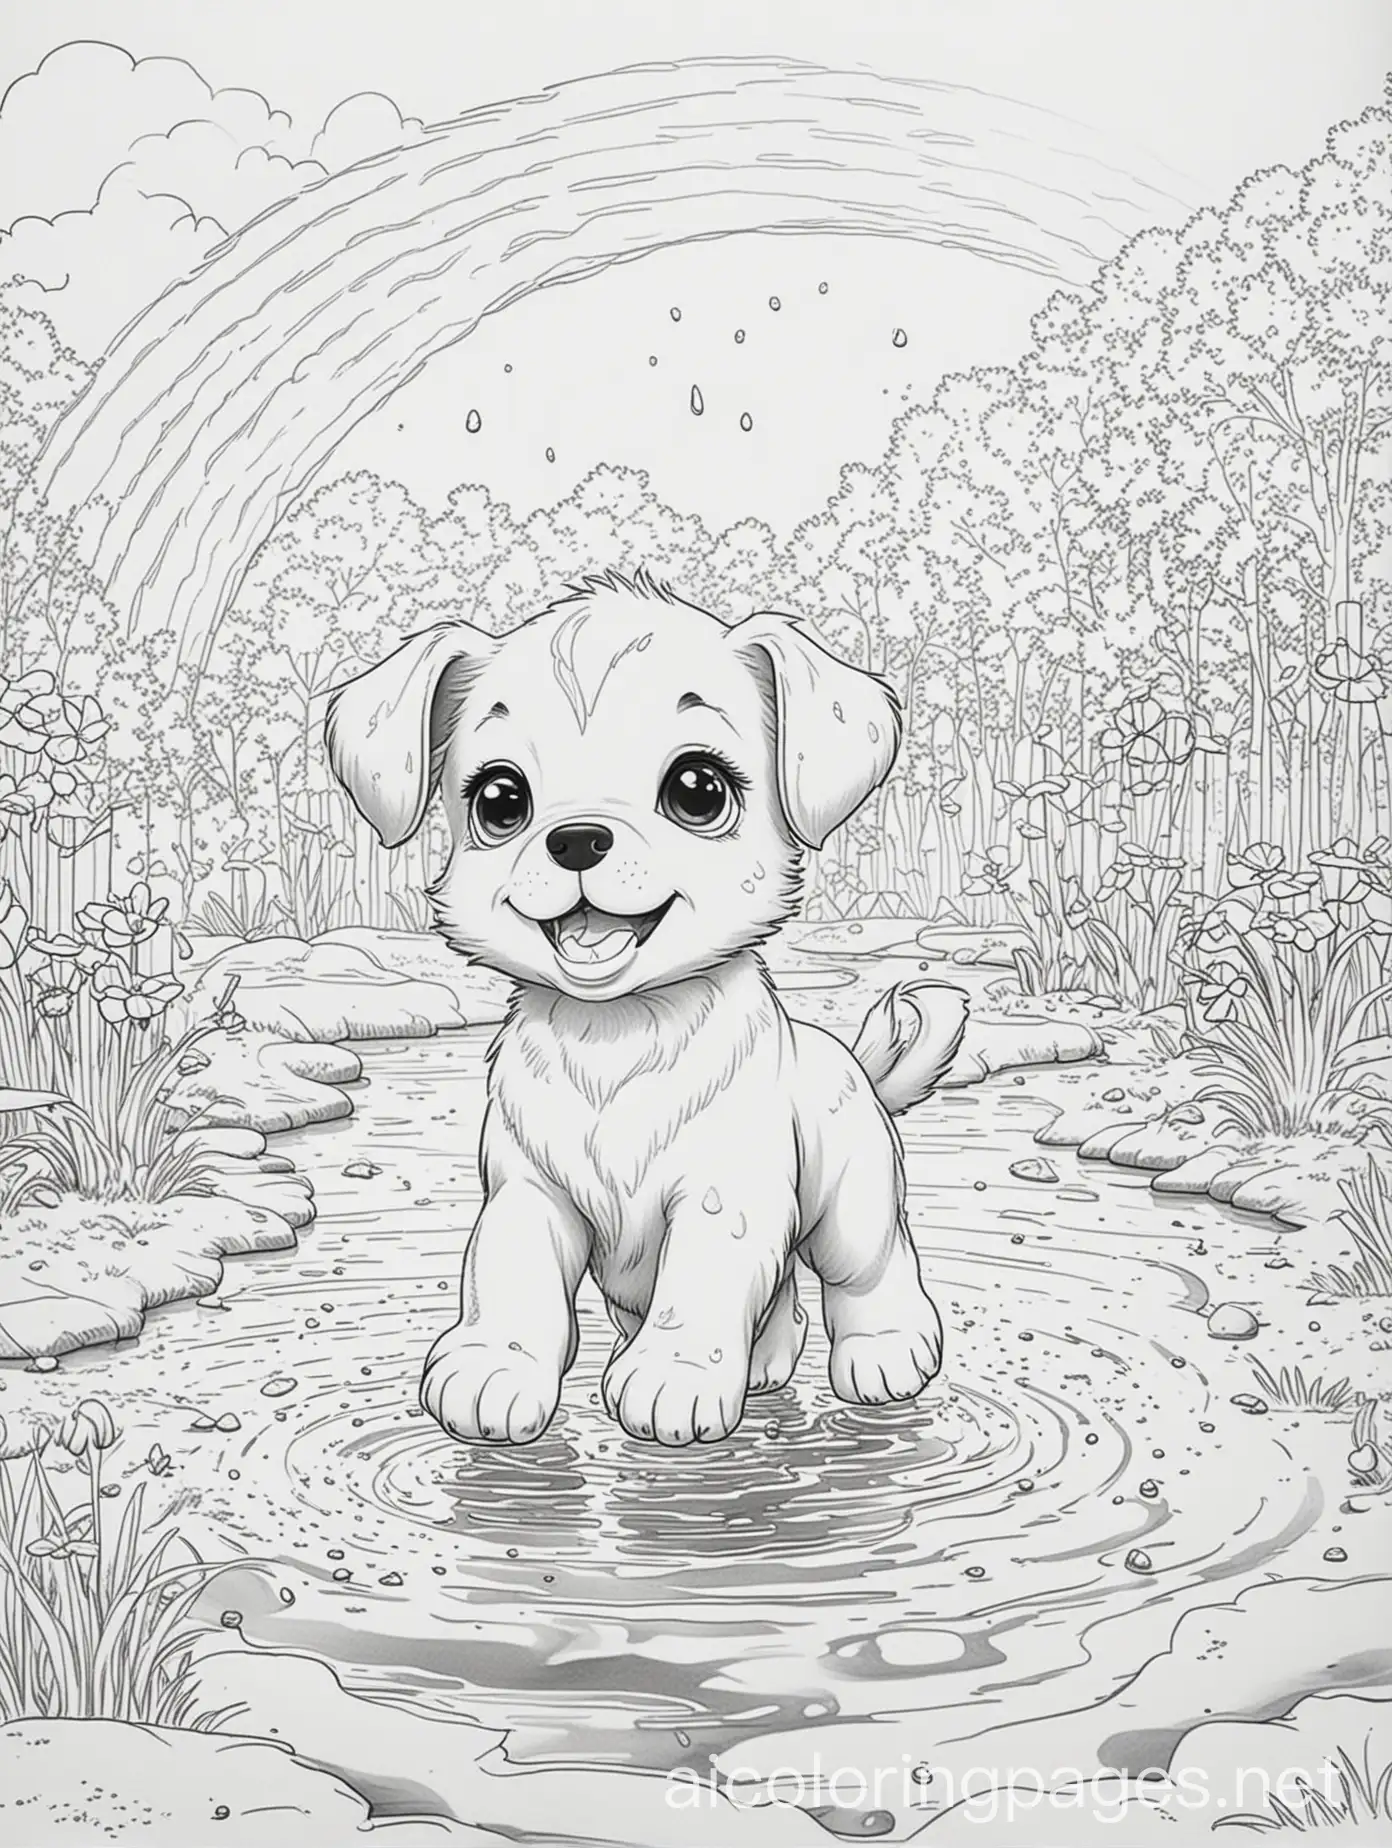 Playful-Puppy-Splashing-Under-Rainbow-in-Sunny-Park-Scene-Coloring-Page